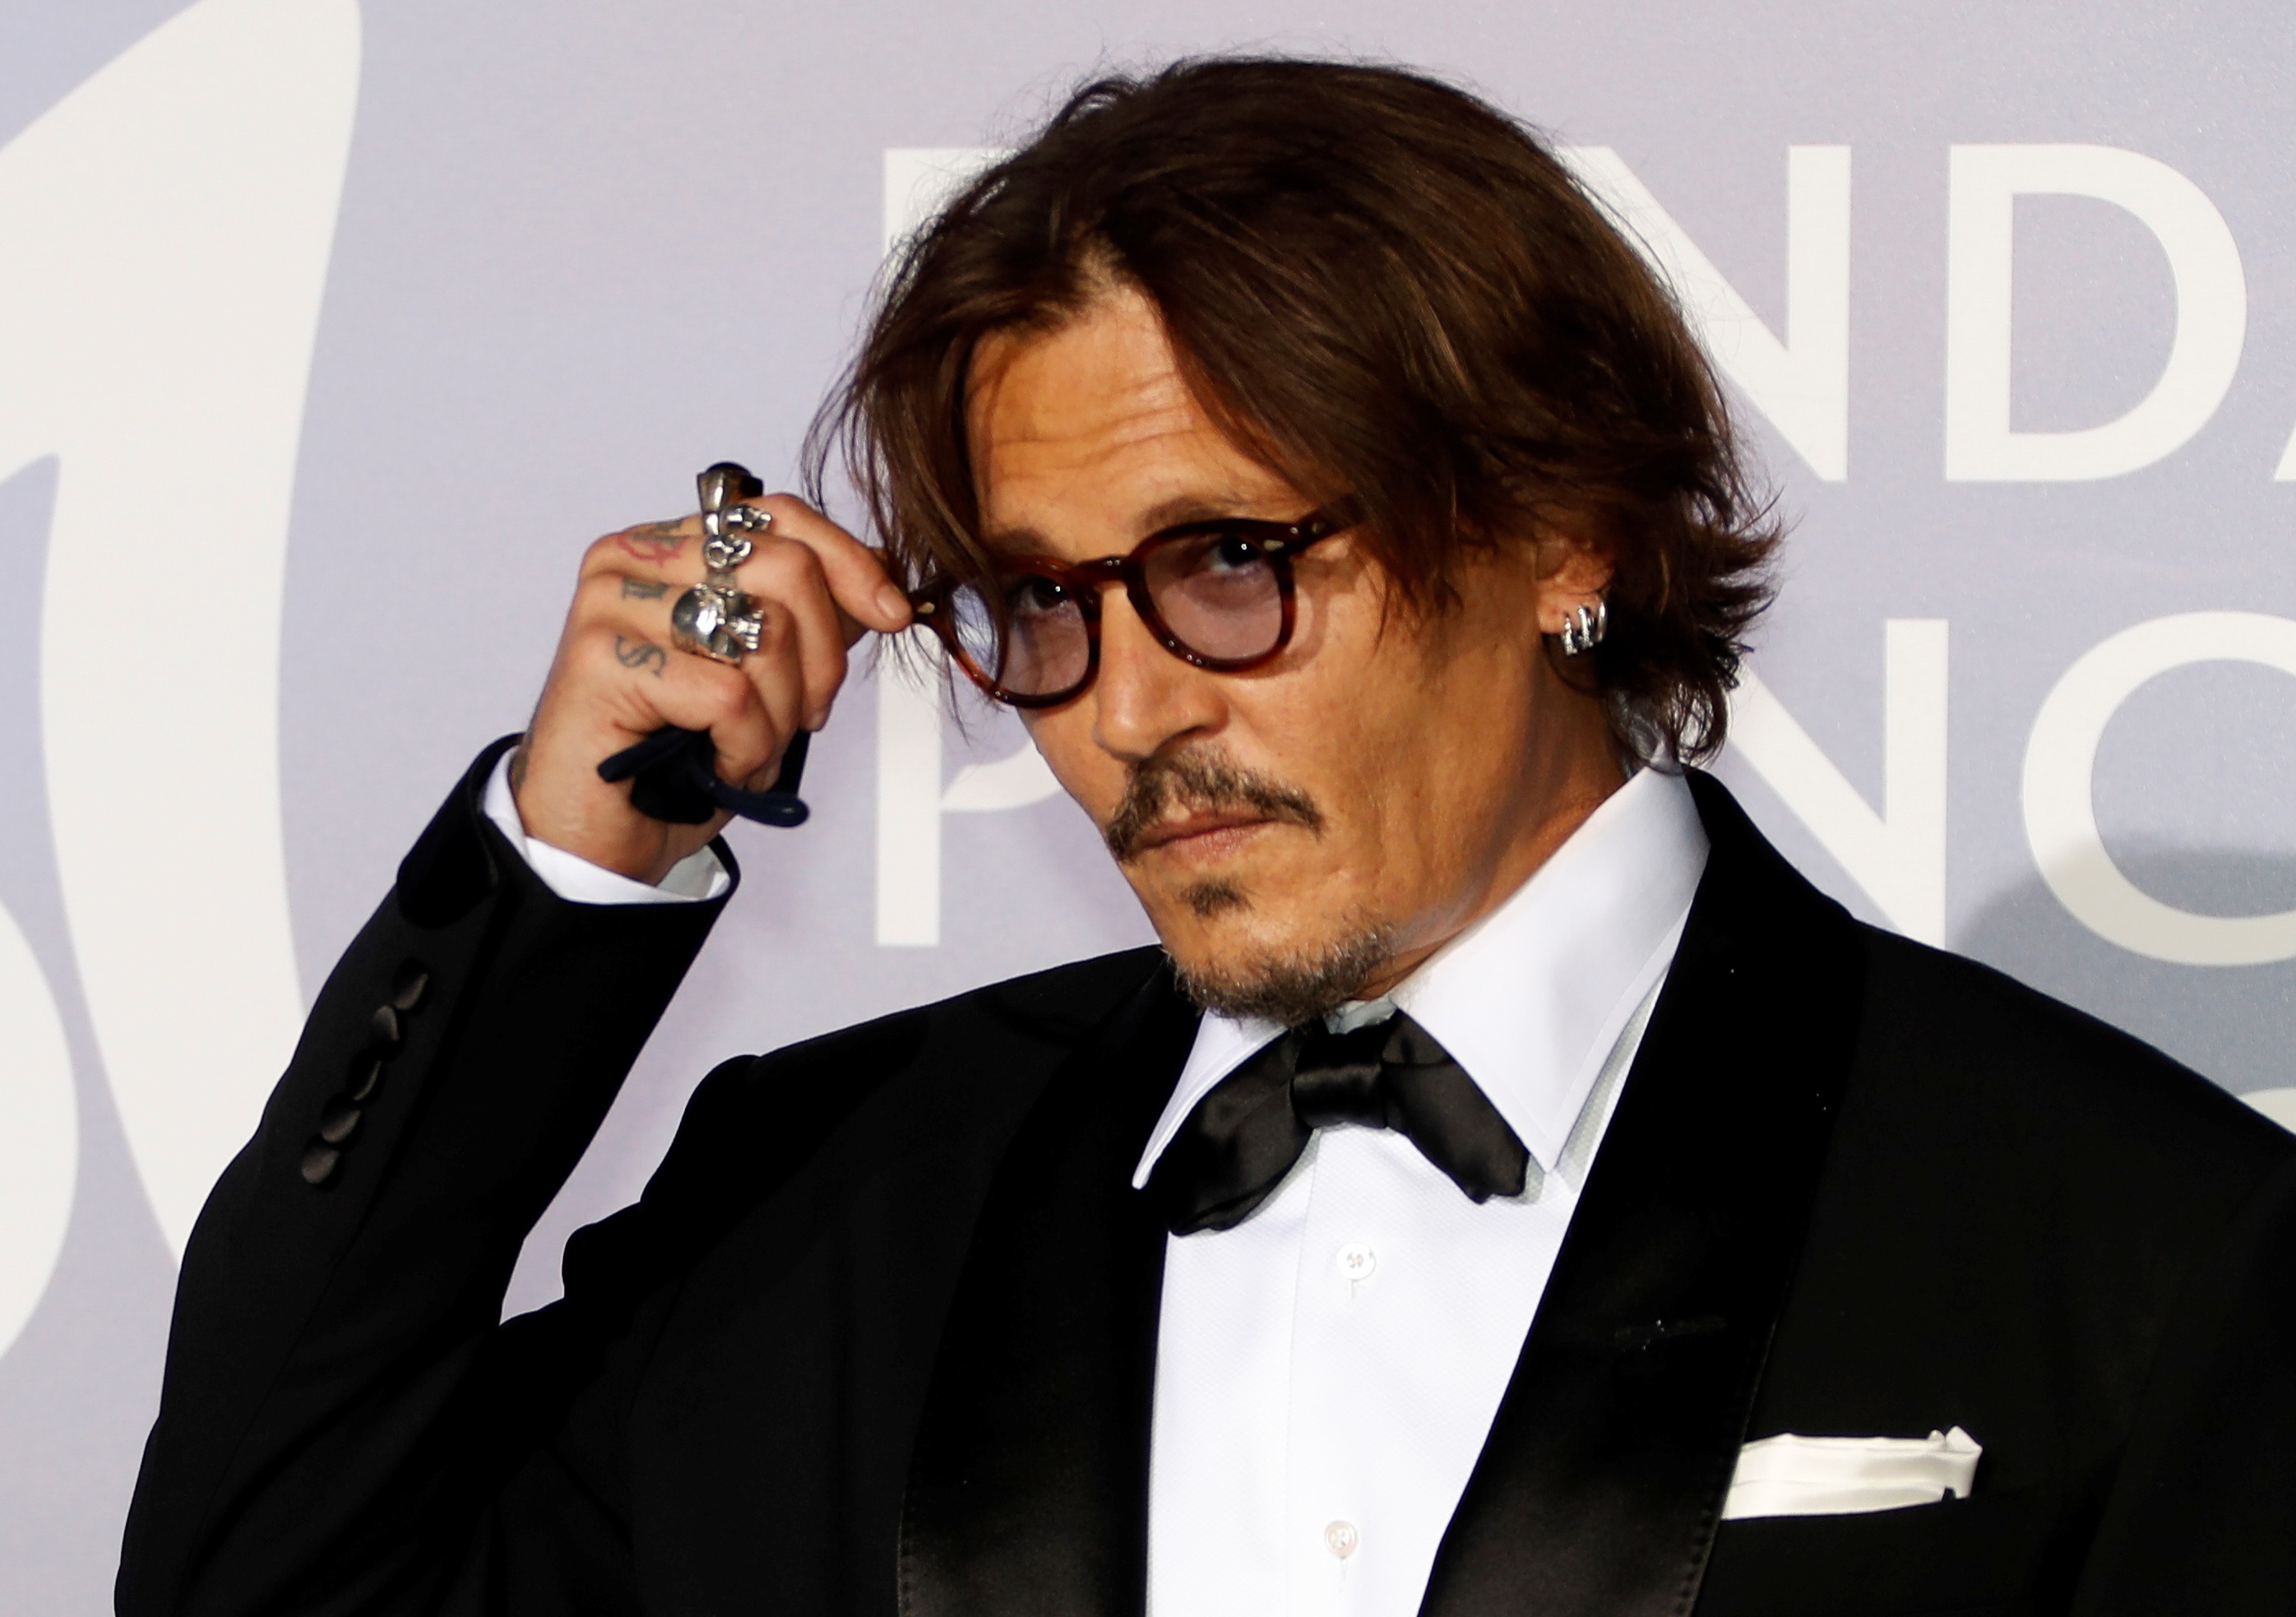 In the picture, actor Johnny Depp (Photo: EFE/EPA/ERIC GAILLARD/POOL/File)